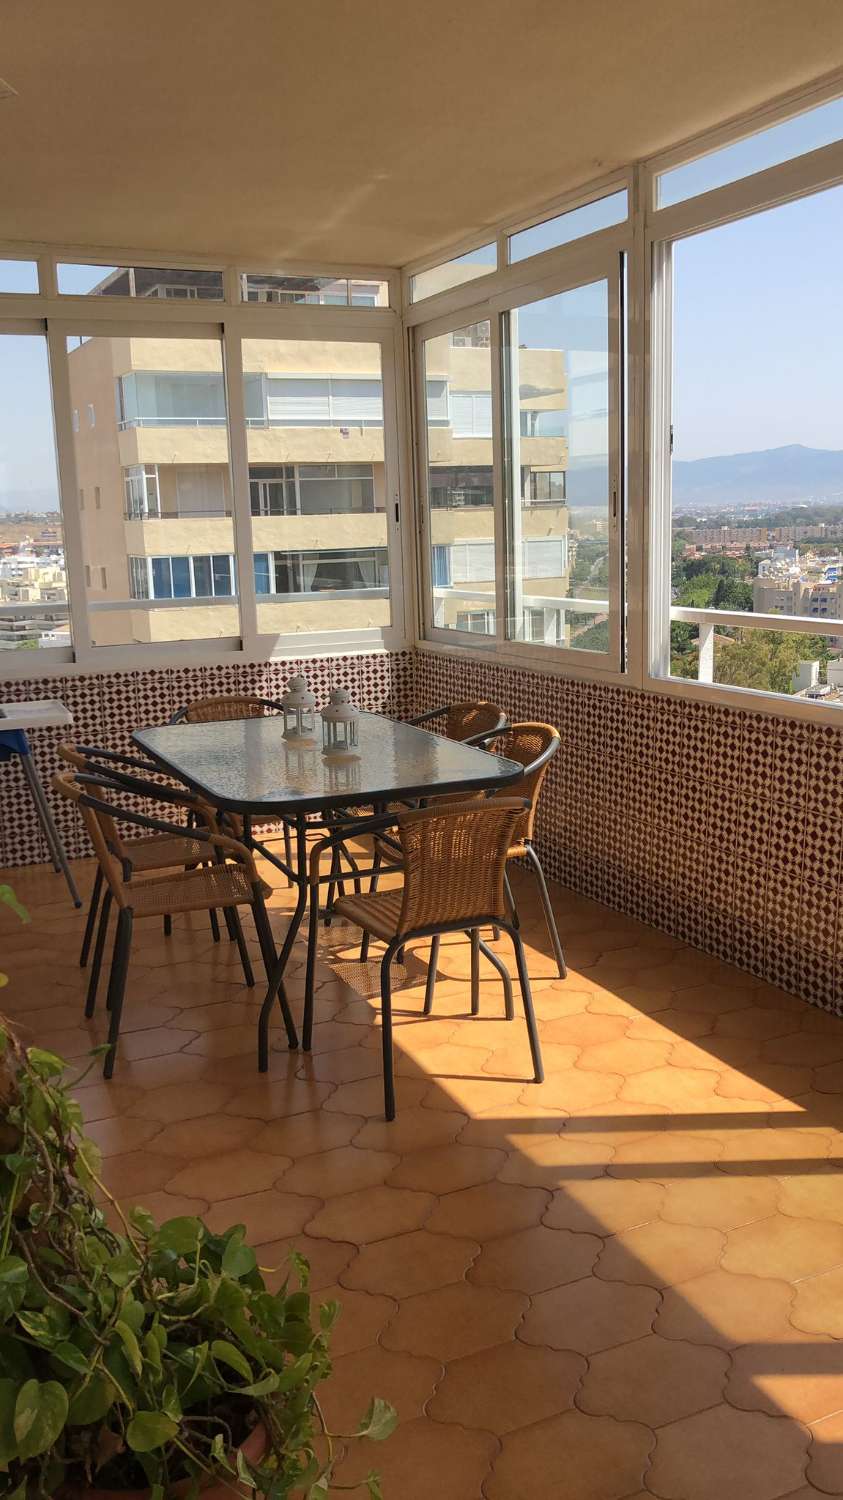 For rent from 01/09/23 to 30/06/24 magnificent apartment in Playamar with sea views (Torremolinos)